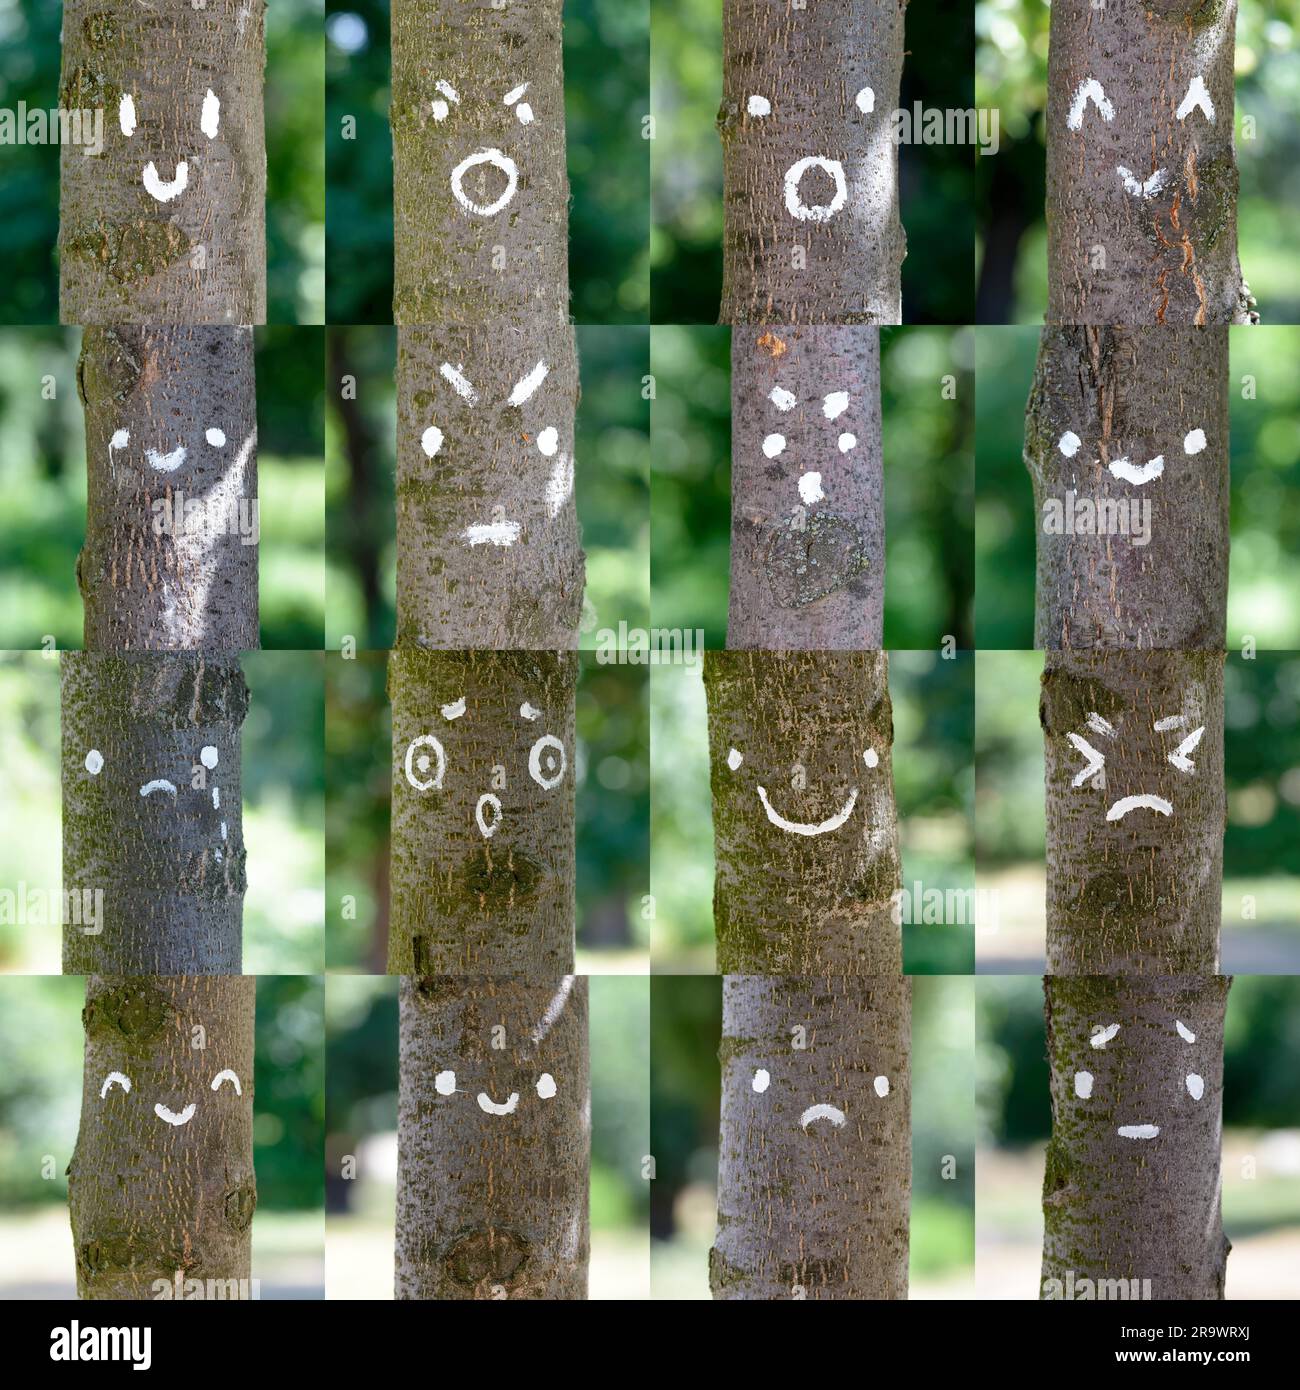 A collection of various smileys painted on tree trunks Stock Photo